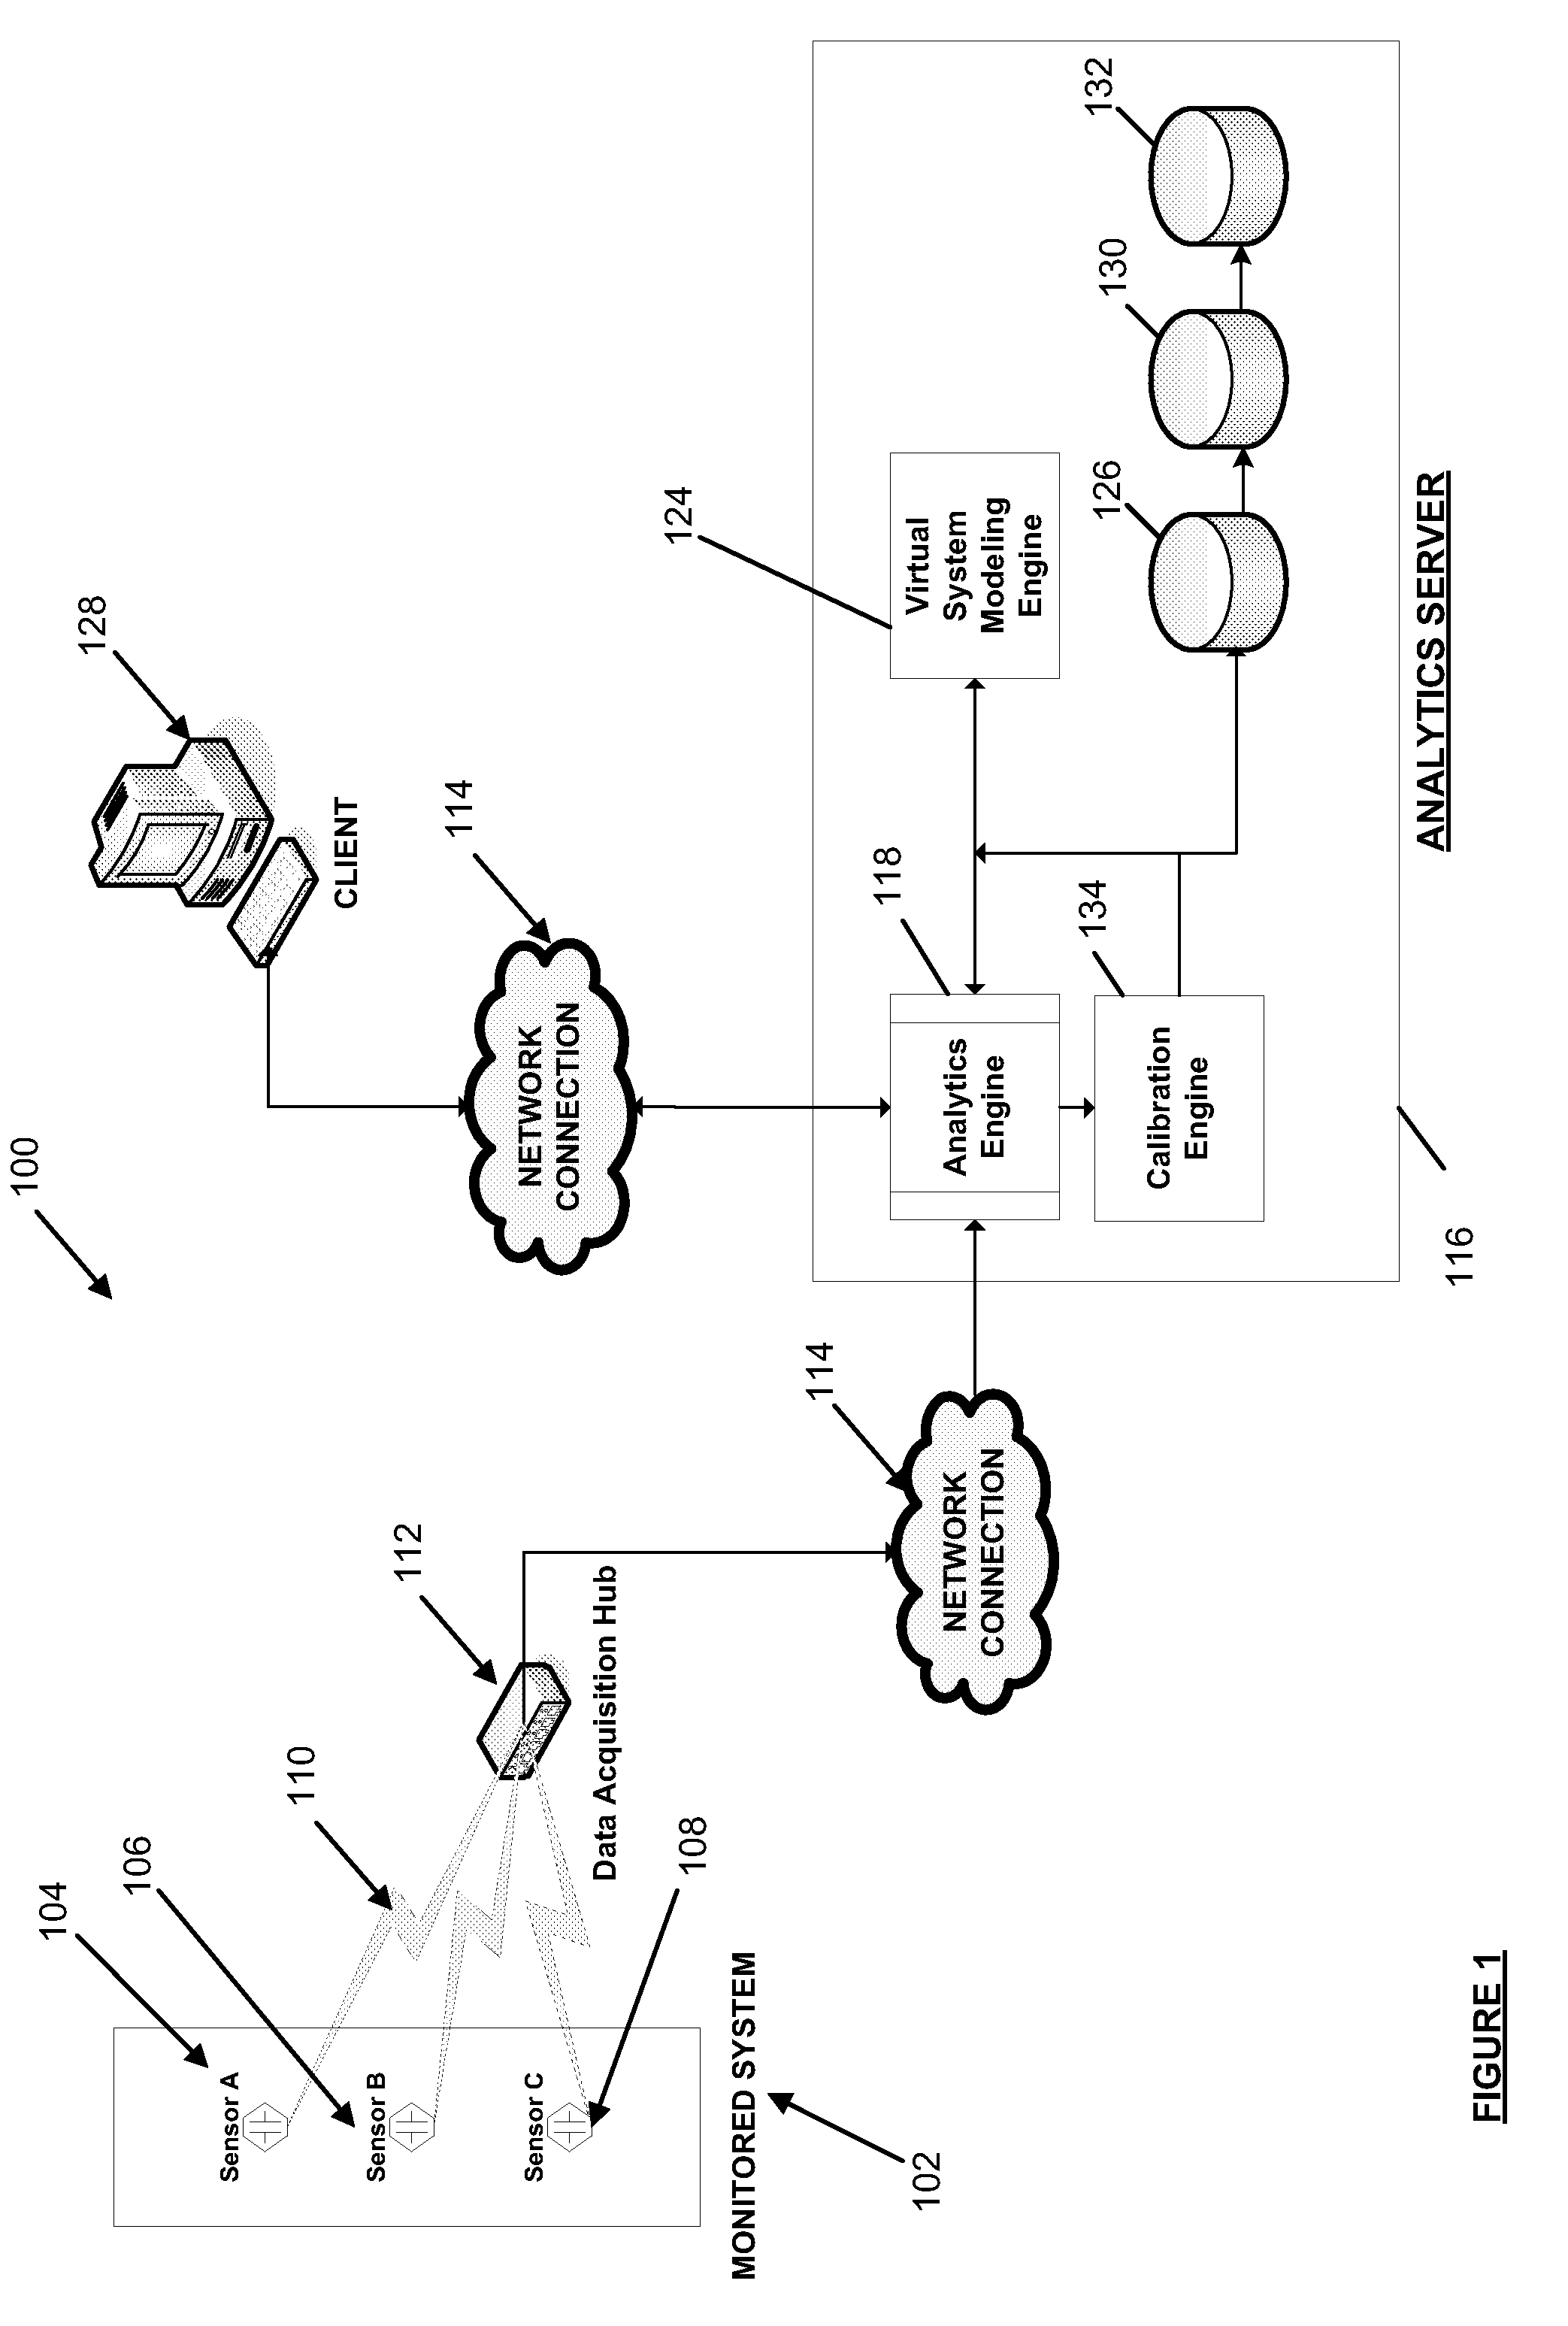 Systems and methods for real-time system monitoring and predictive analysis